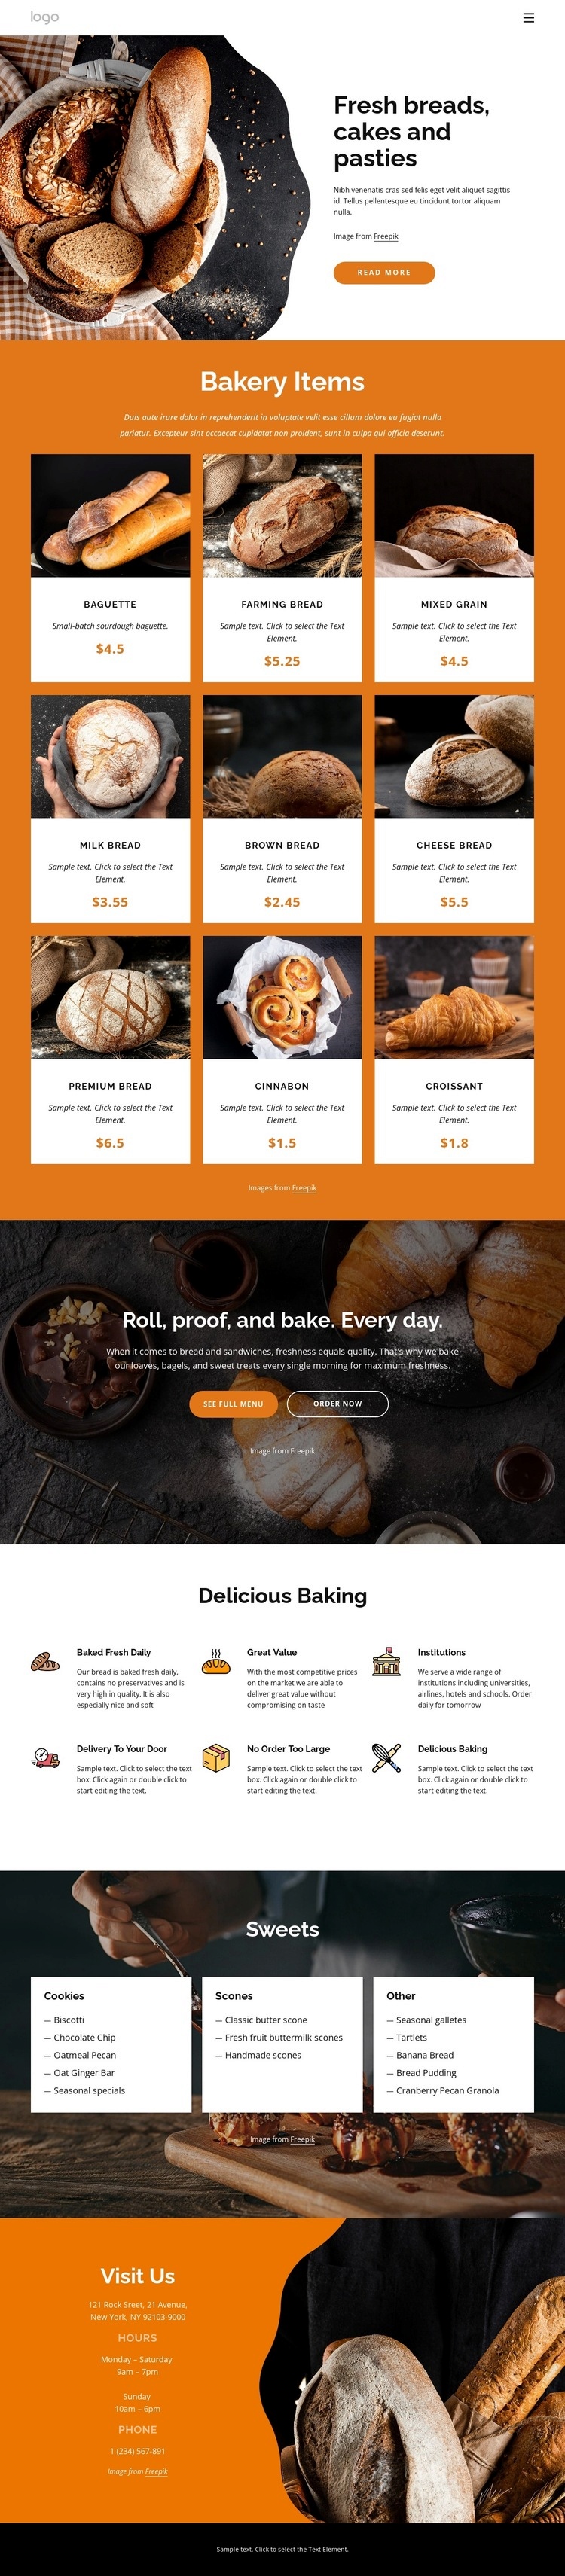 Fresh breads and cakes Homepage Design